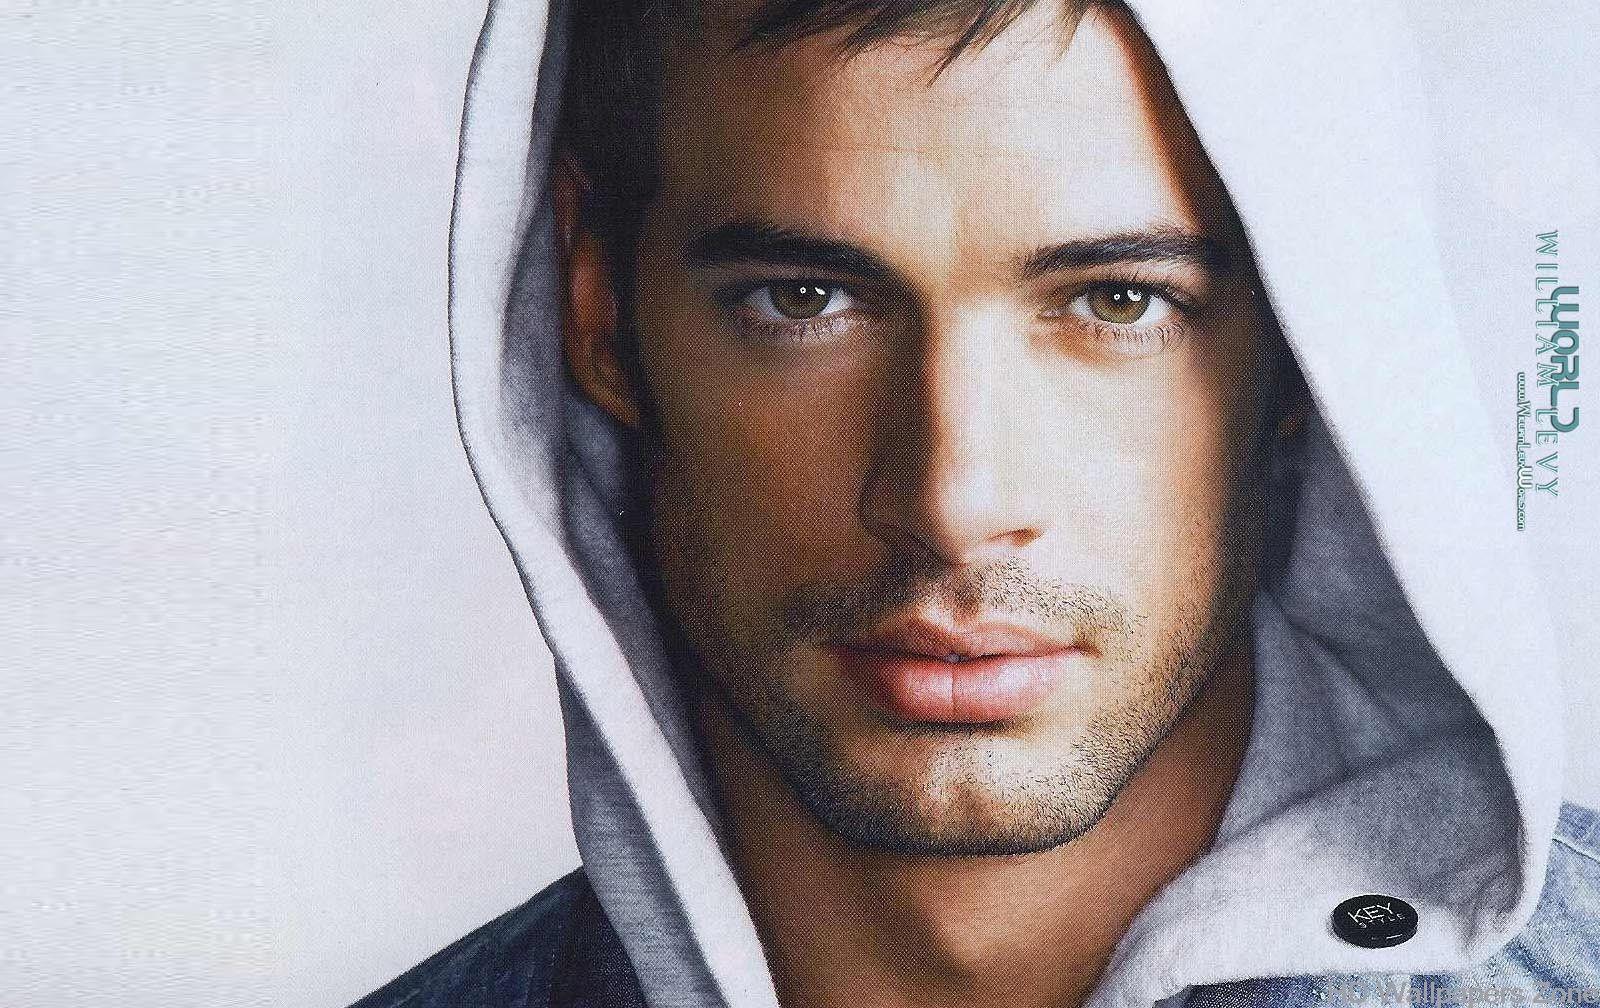 William Levy HD Wallpaper. tophdwallpaperzone